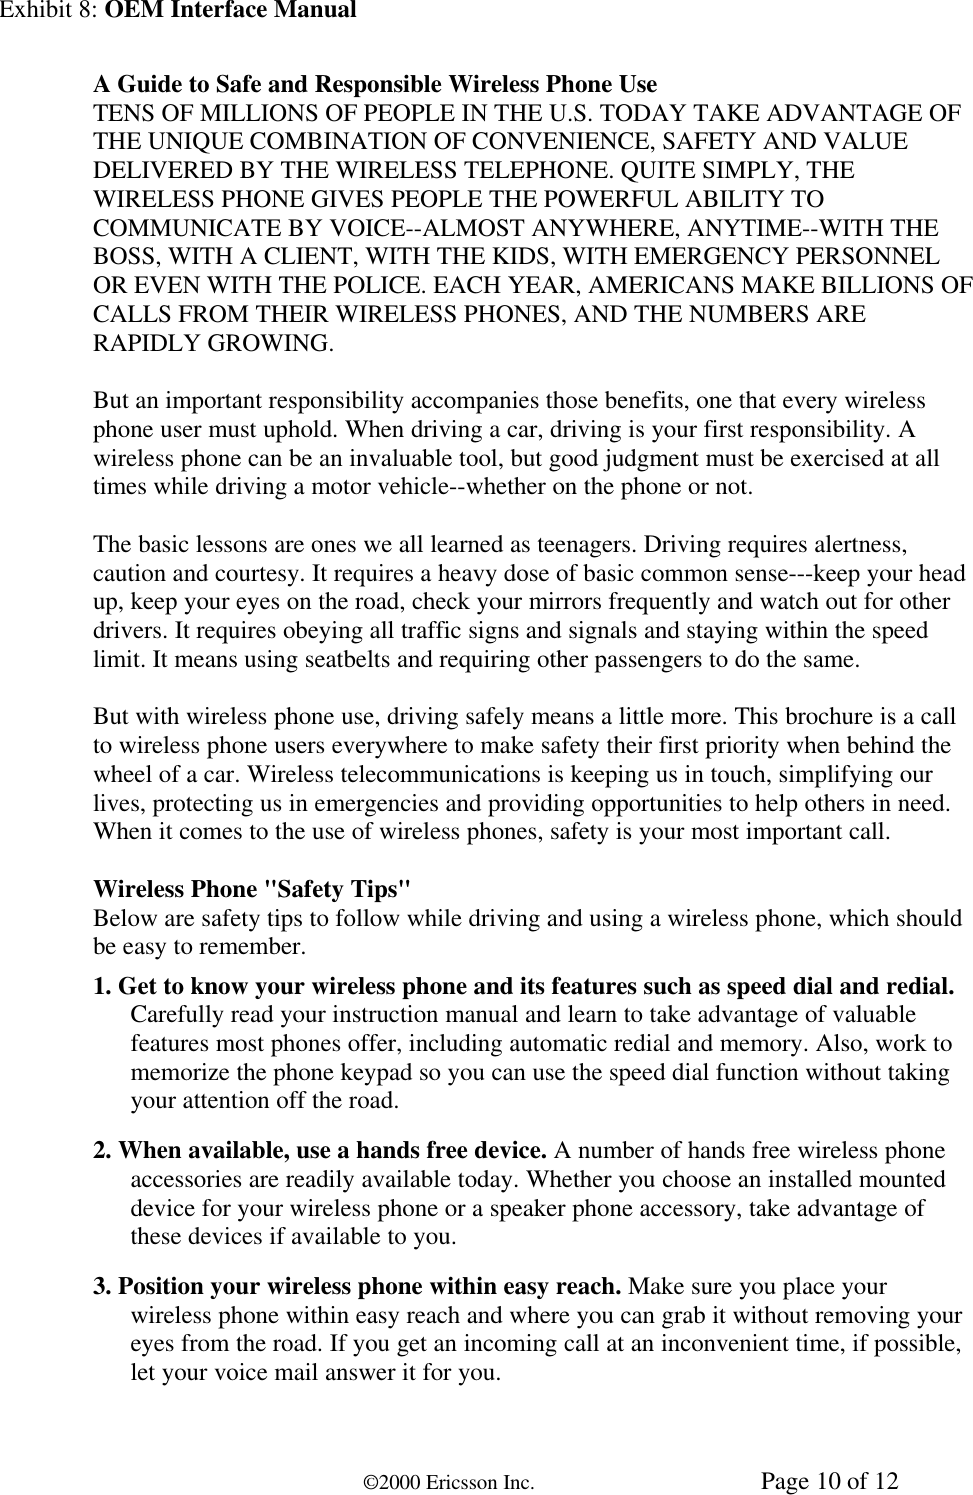 Exhibit 8: OEM Interface Manual©2000 Ericsson Inc. Page 10 of 12A Guide to Safe and Responsible Wireless Phone UseTENS OF MILLIONS OF PEOPLE IN THE U.S. TODAY TAKE ADVANTAGE OFTHE UNIQUE COMBINATION OF CONVENIENCE, SAFETY AND VALUEDELIVERED BY THE WIRELESS TELEPHONE. QUITE SIMPLY, THEWIRELESS PHONE GIVES PEOPLE THE POWERFUL ABILITY TOCOMMUNICATE BY VOICE--ALMOST ANYWHERE, ANYTIME--WITH THEBOSS, WITH A CLIENT, WITH THE KIDS, WITH EMERGENCY PERSONNELOR EVEN WITH THE POLICE. EACH YEAR, AMERICANS MAKE BILLIONS OFCALLS FROM THEIR WIRELESS PHONES, AND THE NUMBERS ARERAPIDLY GROWING.But an important responsibility accompanies those benefits, one that every wirelessphone user must uphold. When driving a car, driving is your first responsibility. Awireless phone can be an invaluable tool, but good judgment must be exercised at alltimes while driving a motor vehicle--whether on the phone or not.The basic lessons are ones we all learned as teenagers. Driving requires alertness,caution and courtesy. It requires a heavy dose of basic common sense---keep your headup, keep your eyes on the road, check your mirrors frequently and watch out for otherdrivers. It requires obeying all traffic signs and signals and staying within the speedlimit. It means using seatbelts and requiring other passengers to do the same.But with wireless phone use, driving safely means a little more. This brochure is a callto wireless phone users everywhere to make safety their first priority when behind thewheel of a car. Wireless telecommunications is keeping us in touch, simplifying ourlives, protecting us in emergencies and providing opportunities to help others in need.When it comes to the use of wireless phones, safety is your most important call.Wireless Phone &quot;Safety Tips&quot;Below are safety tips to follow while driving and using a wireless phone, which shouldbe easy to remember.1. Get to know your wireless phone and its features such as speed dial and redial.Carefully read your instruction manual and learn to take advantage of valuablefeatures most phones offer, including automatic redial and memory. Also, work tomemorize the phone keypad so you can use the speed dial function without takingyour attention off the road.2. When available, use a hands free device. A number of hands free wireless phoneaccessories are readily available today. Whether you choose an installed mounteddevice for your wireless phone or a speaker phone accessory, take advantage ofthese devices if available to you.3. Position your wireless phone within easy reach. Make sure you place yourwireless phone within easy reach and where you can grab it without removing youreyes from the road. If you get an incoming call at an inconvenient time, if possible,let your voice mail answer it for you.